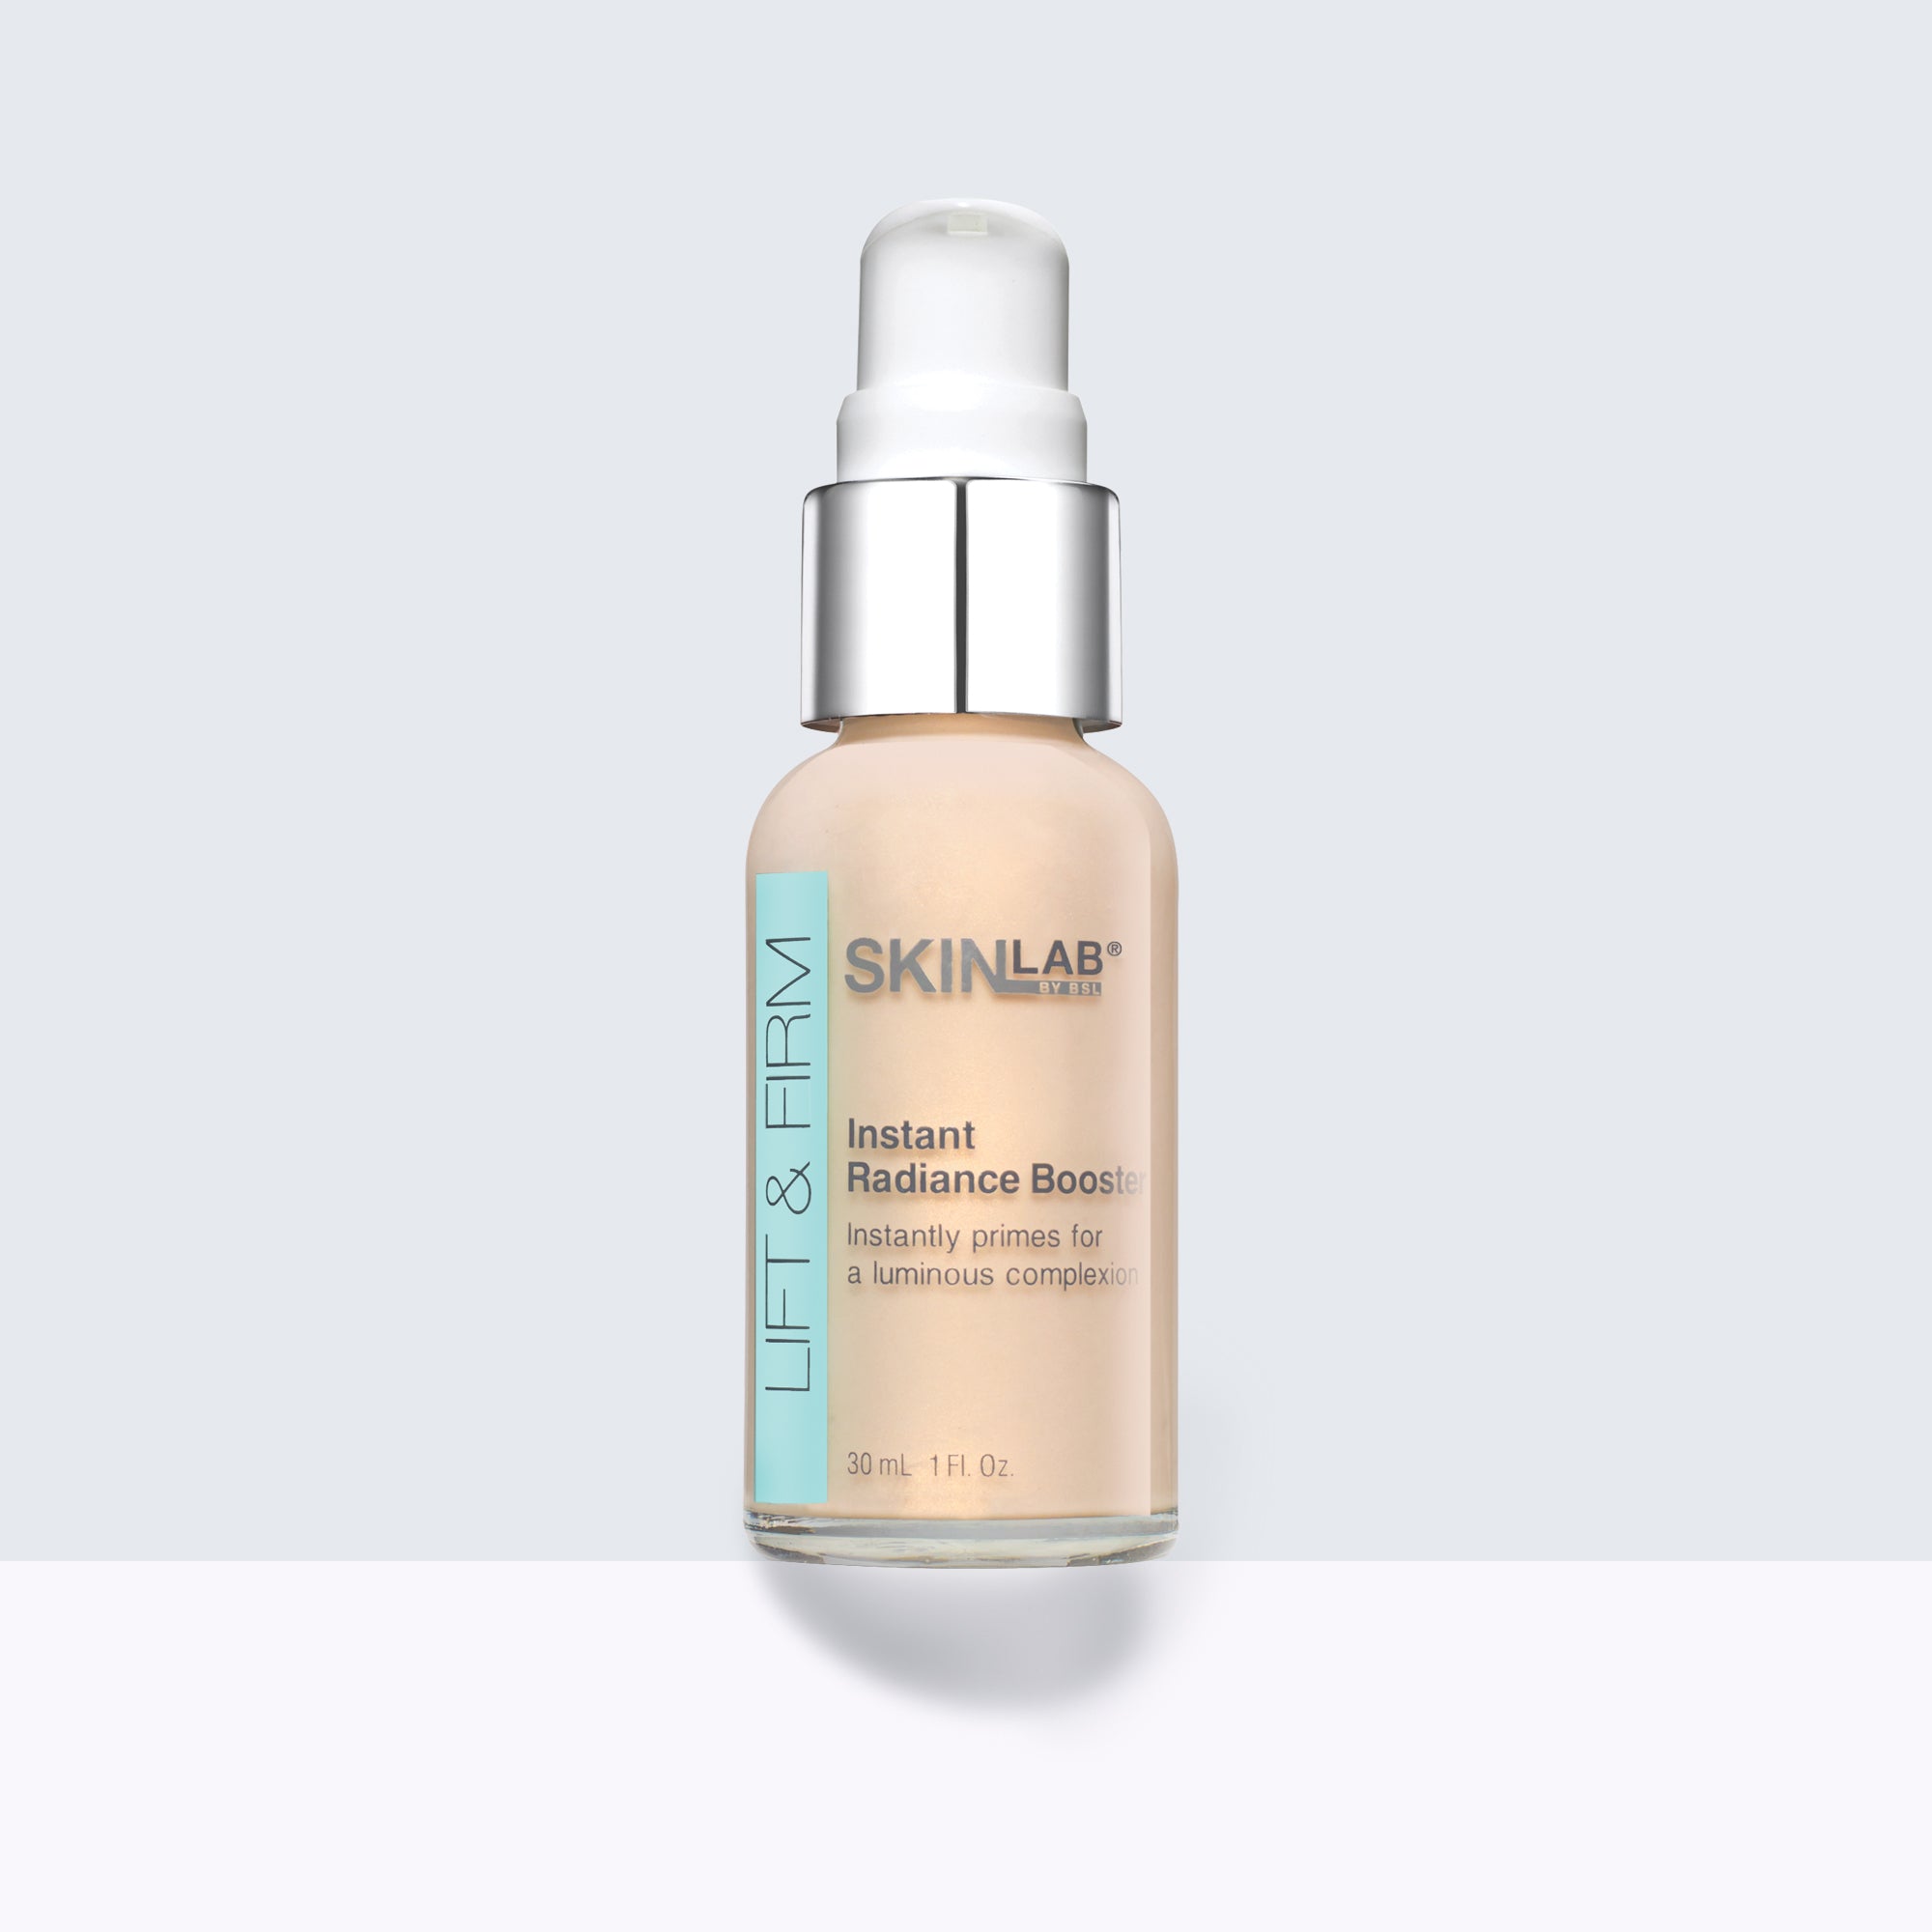 Skinlab by BSL Lift & Firm Instant Radiance Booster